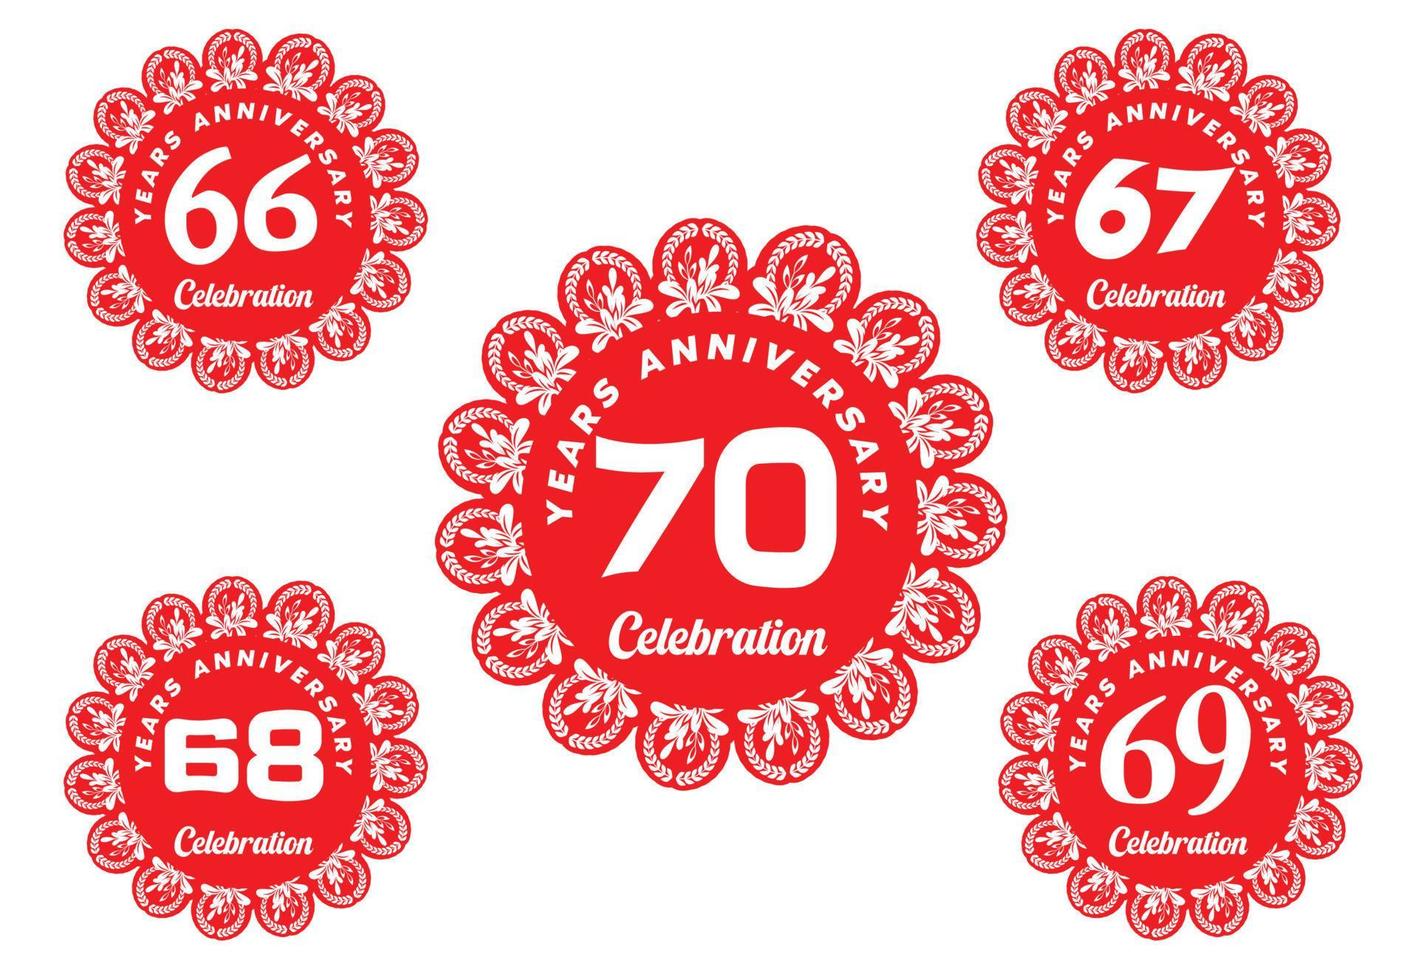 66 to 70 years anniversary logo and sticker design template vector